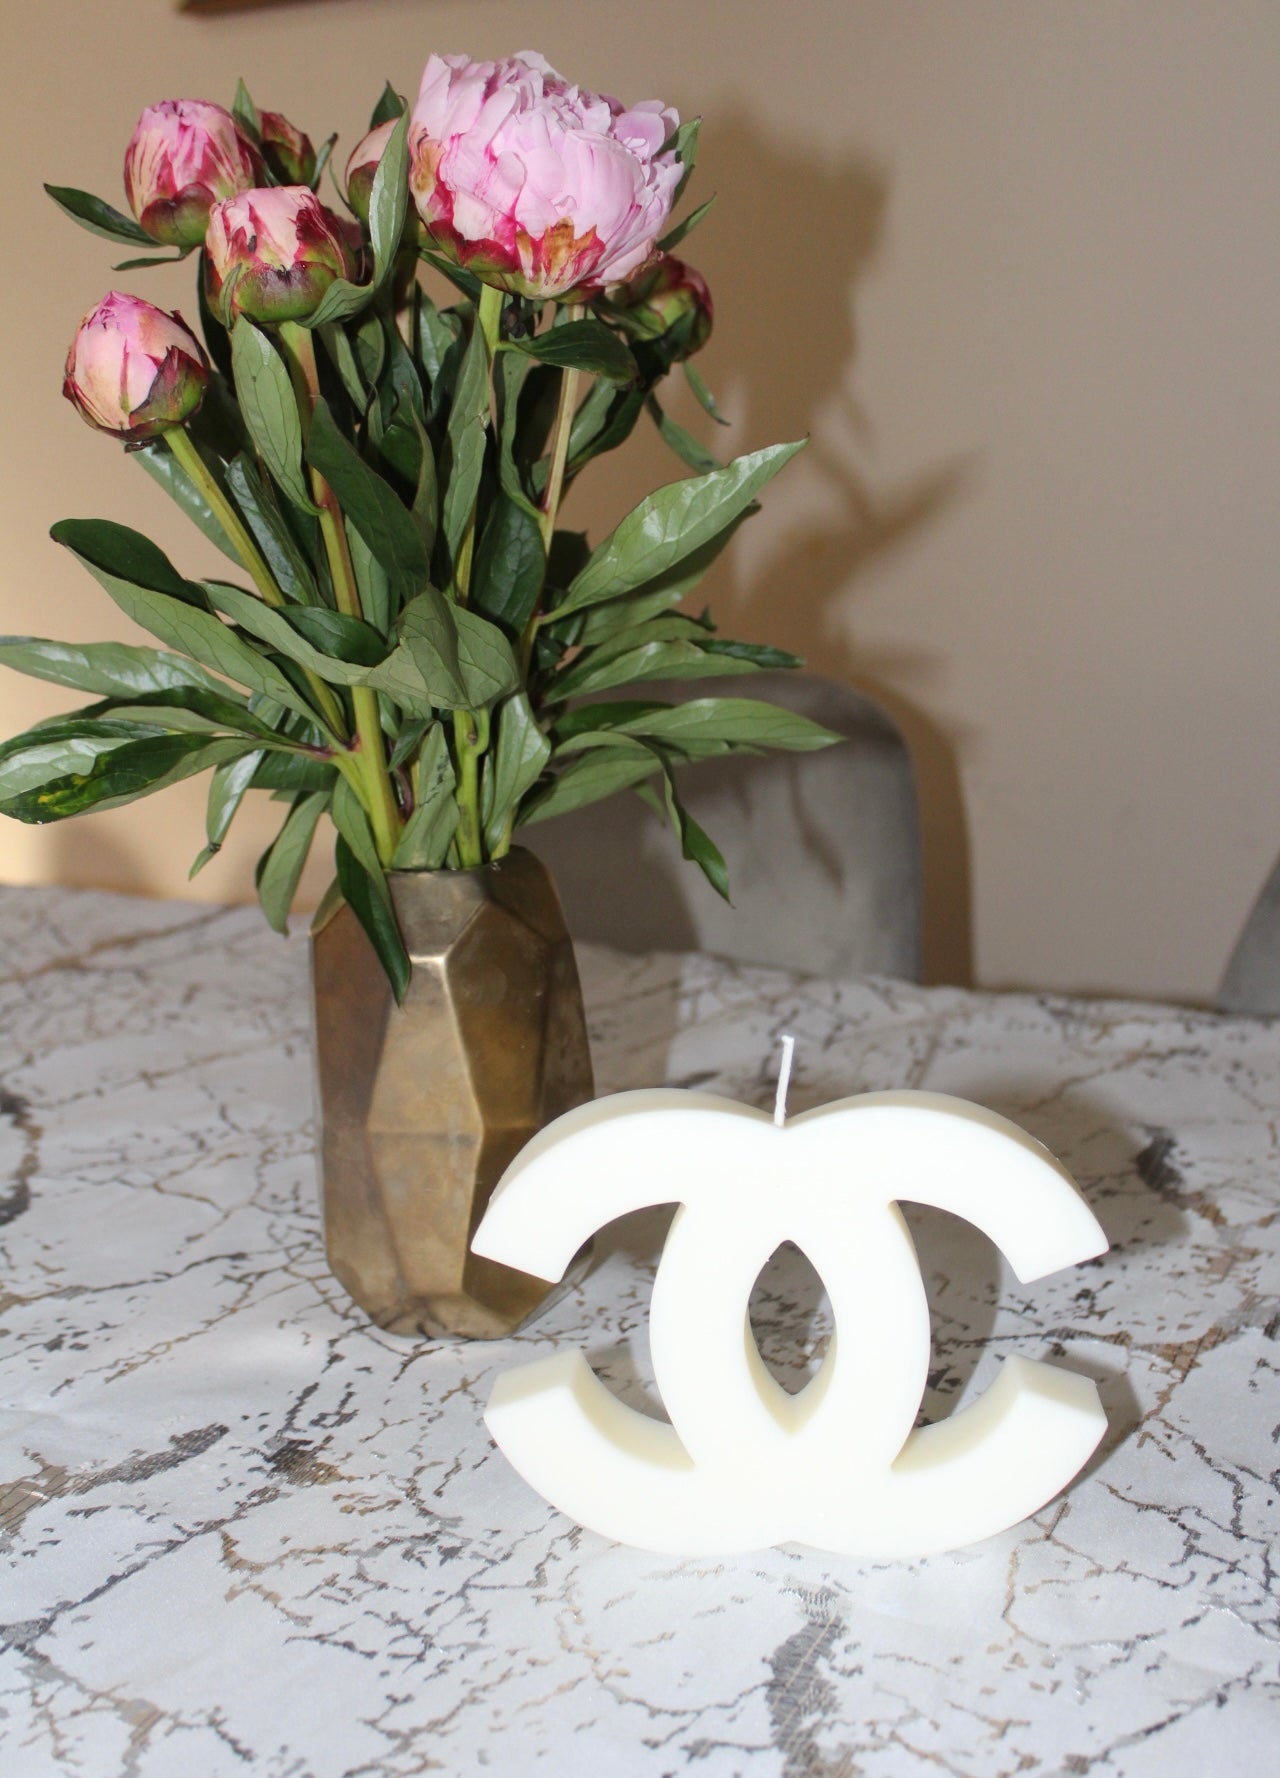 chanel no 5 candles